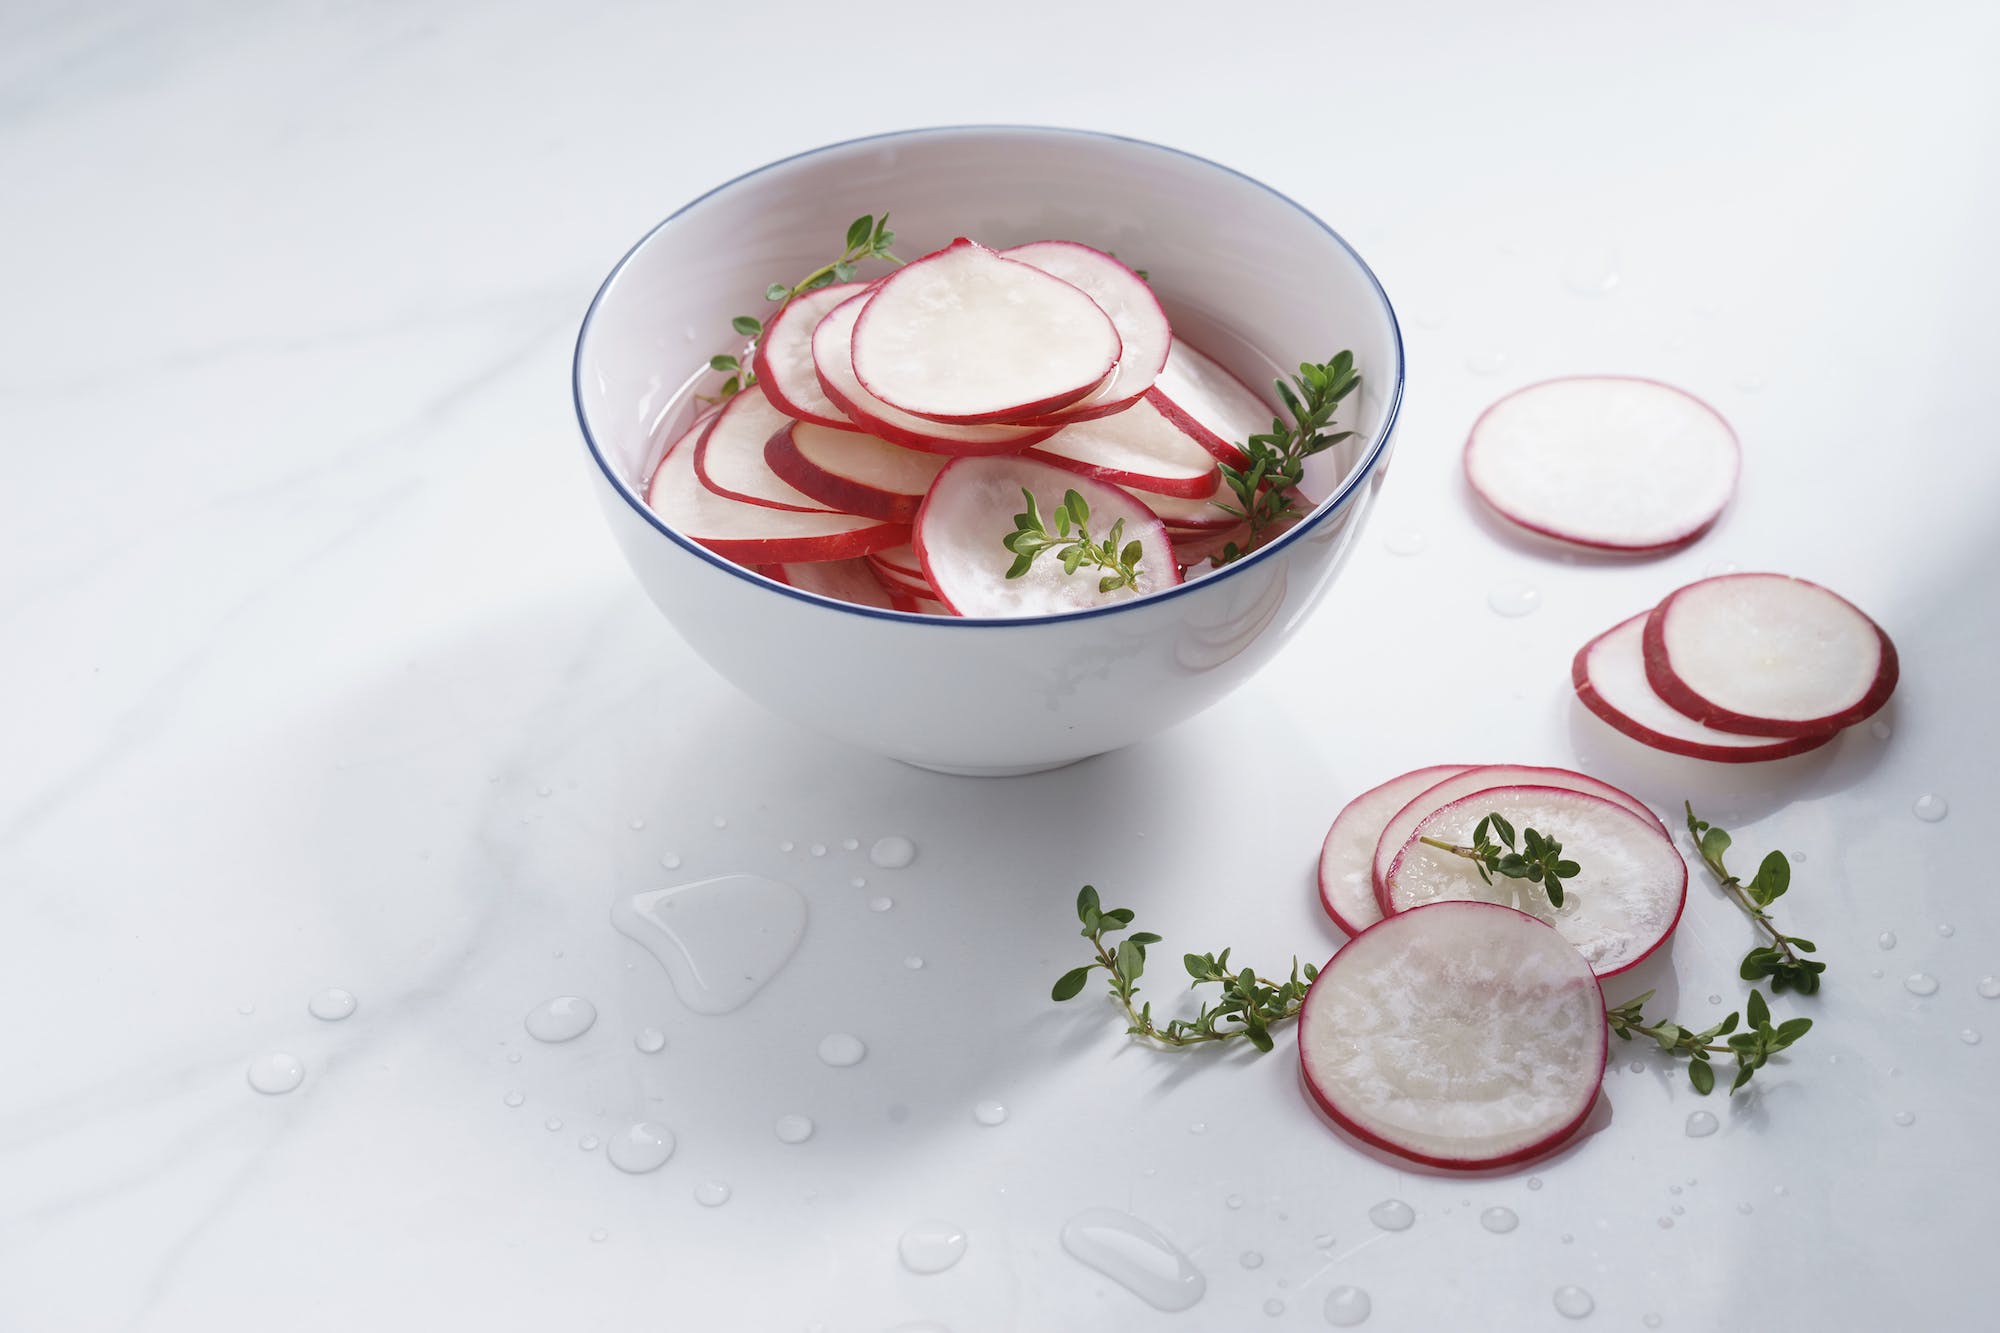 Reaping the Benefits of Radishes